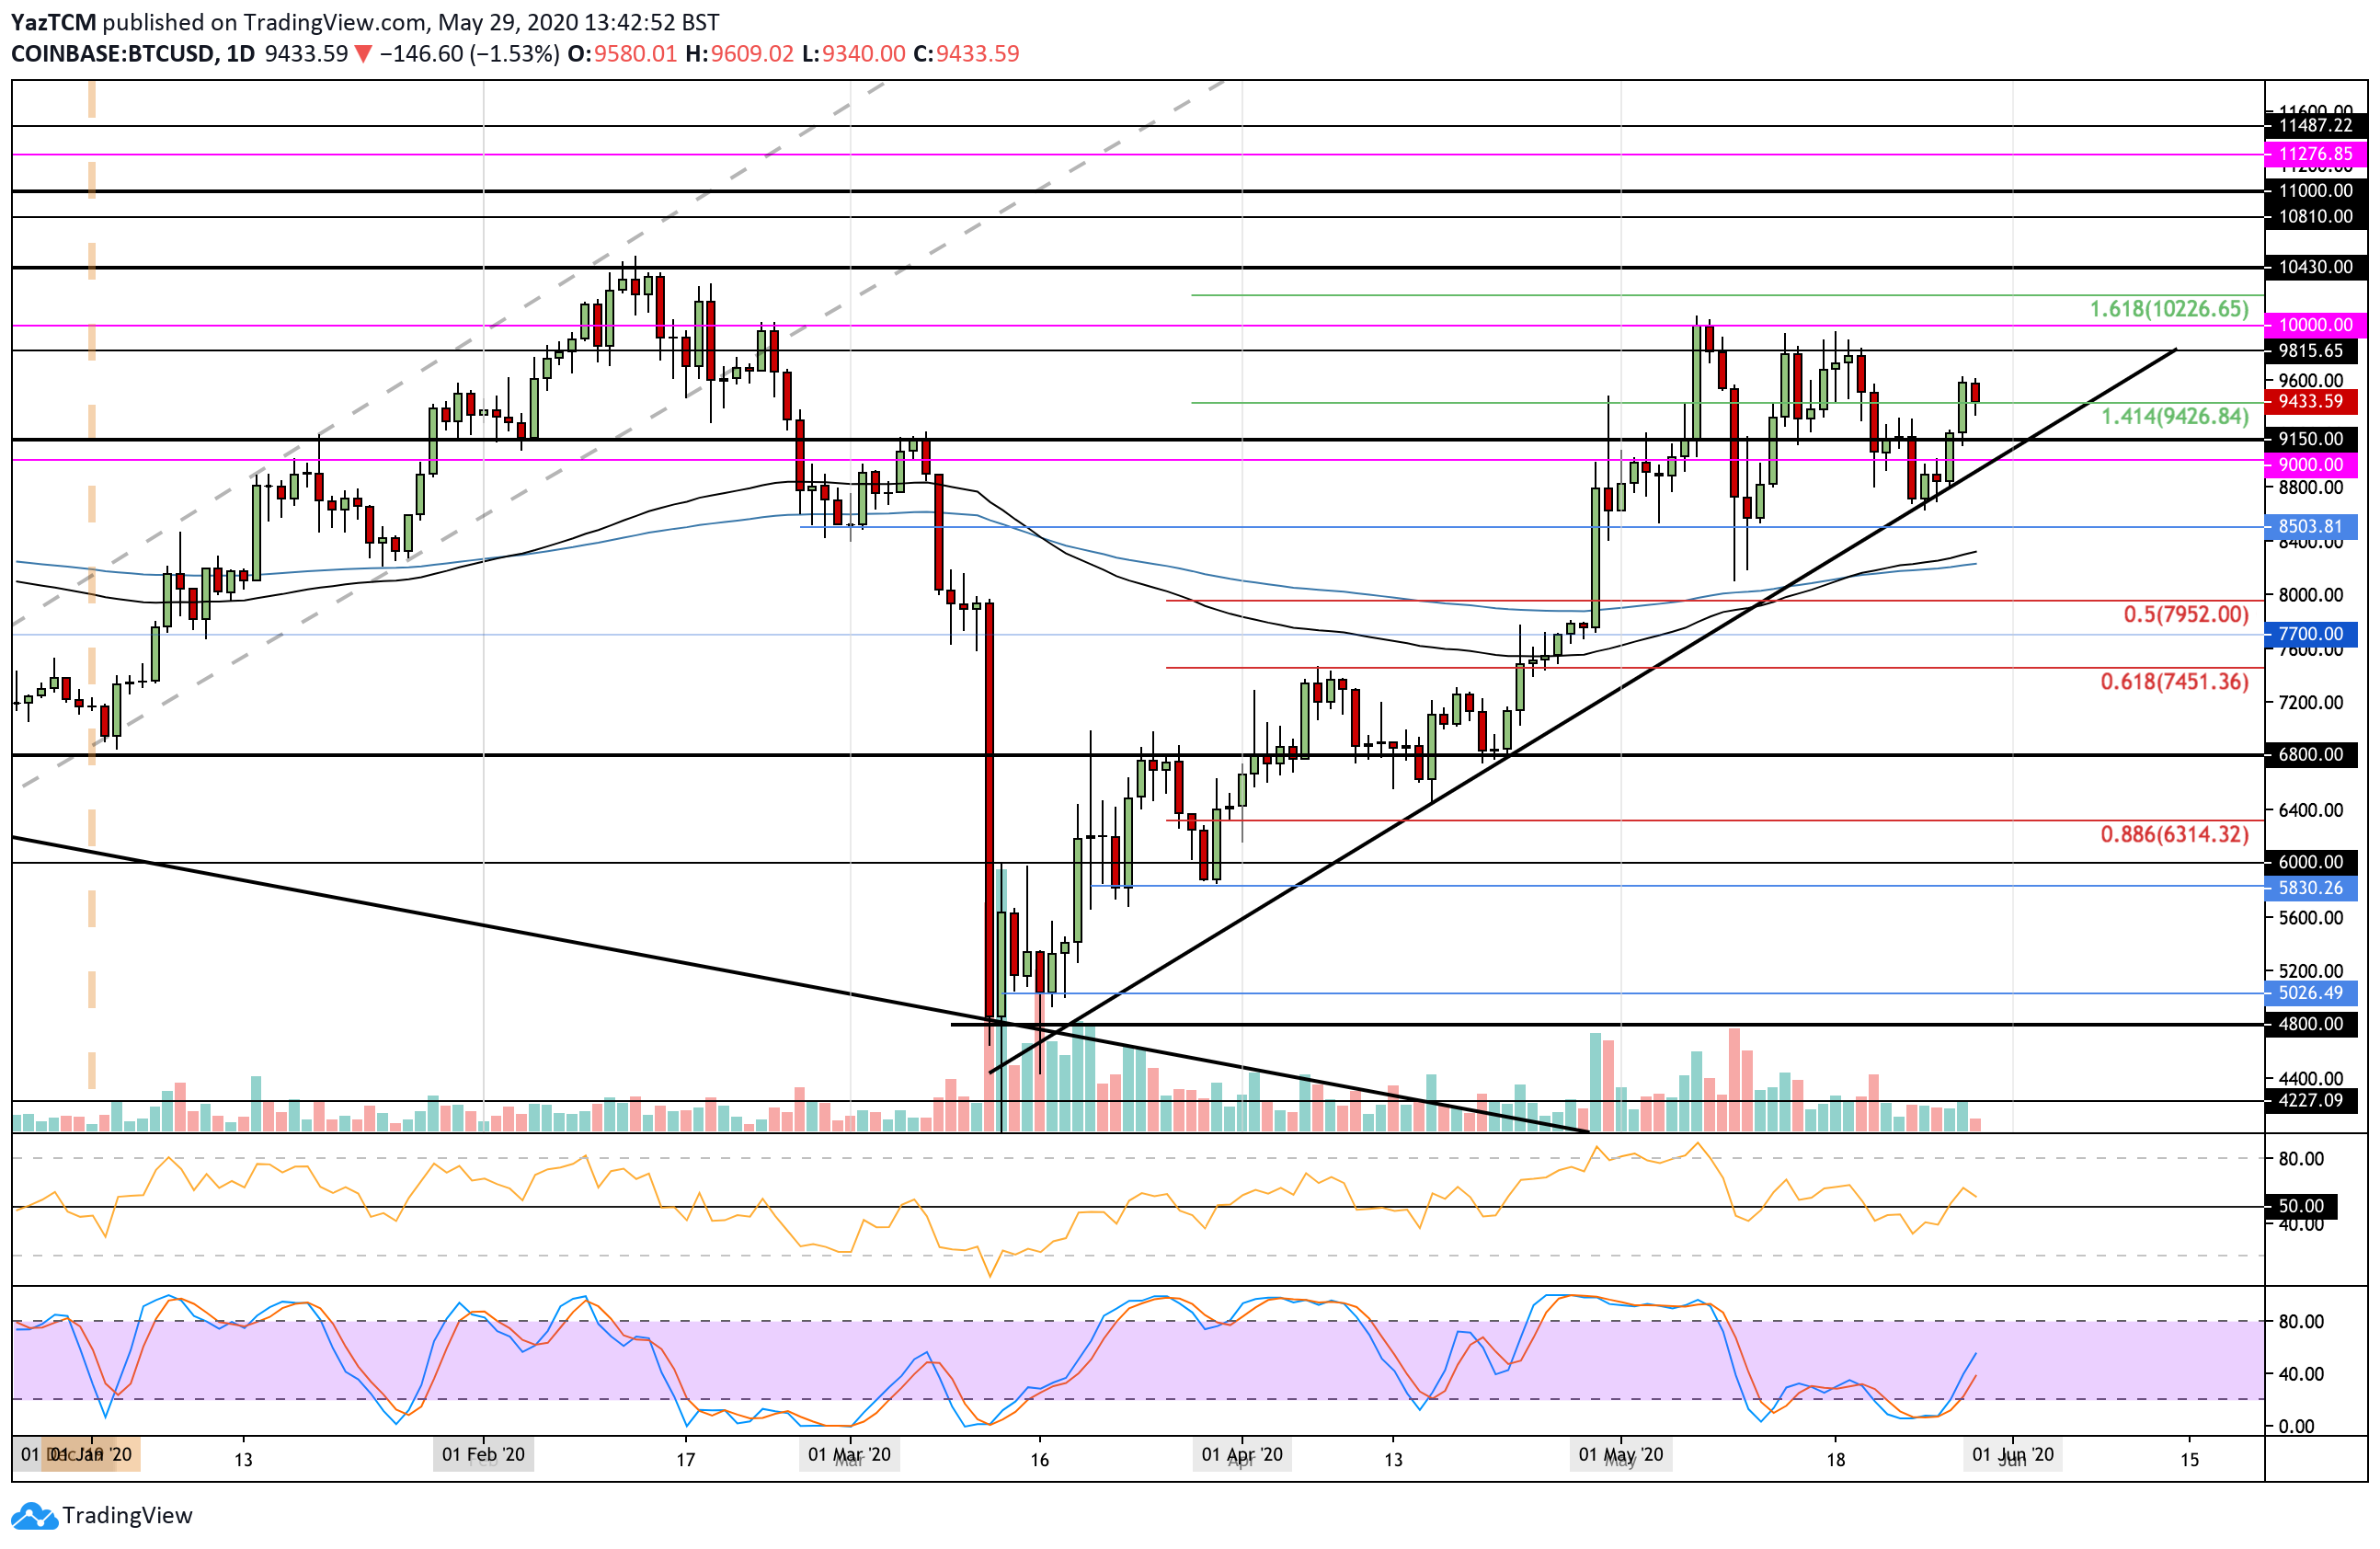 Crypto Price Analysis & Overview May 29th: Bitcoin, Ethereum, Ripple, Tezos, and Chainlink